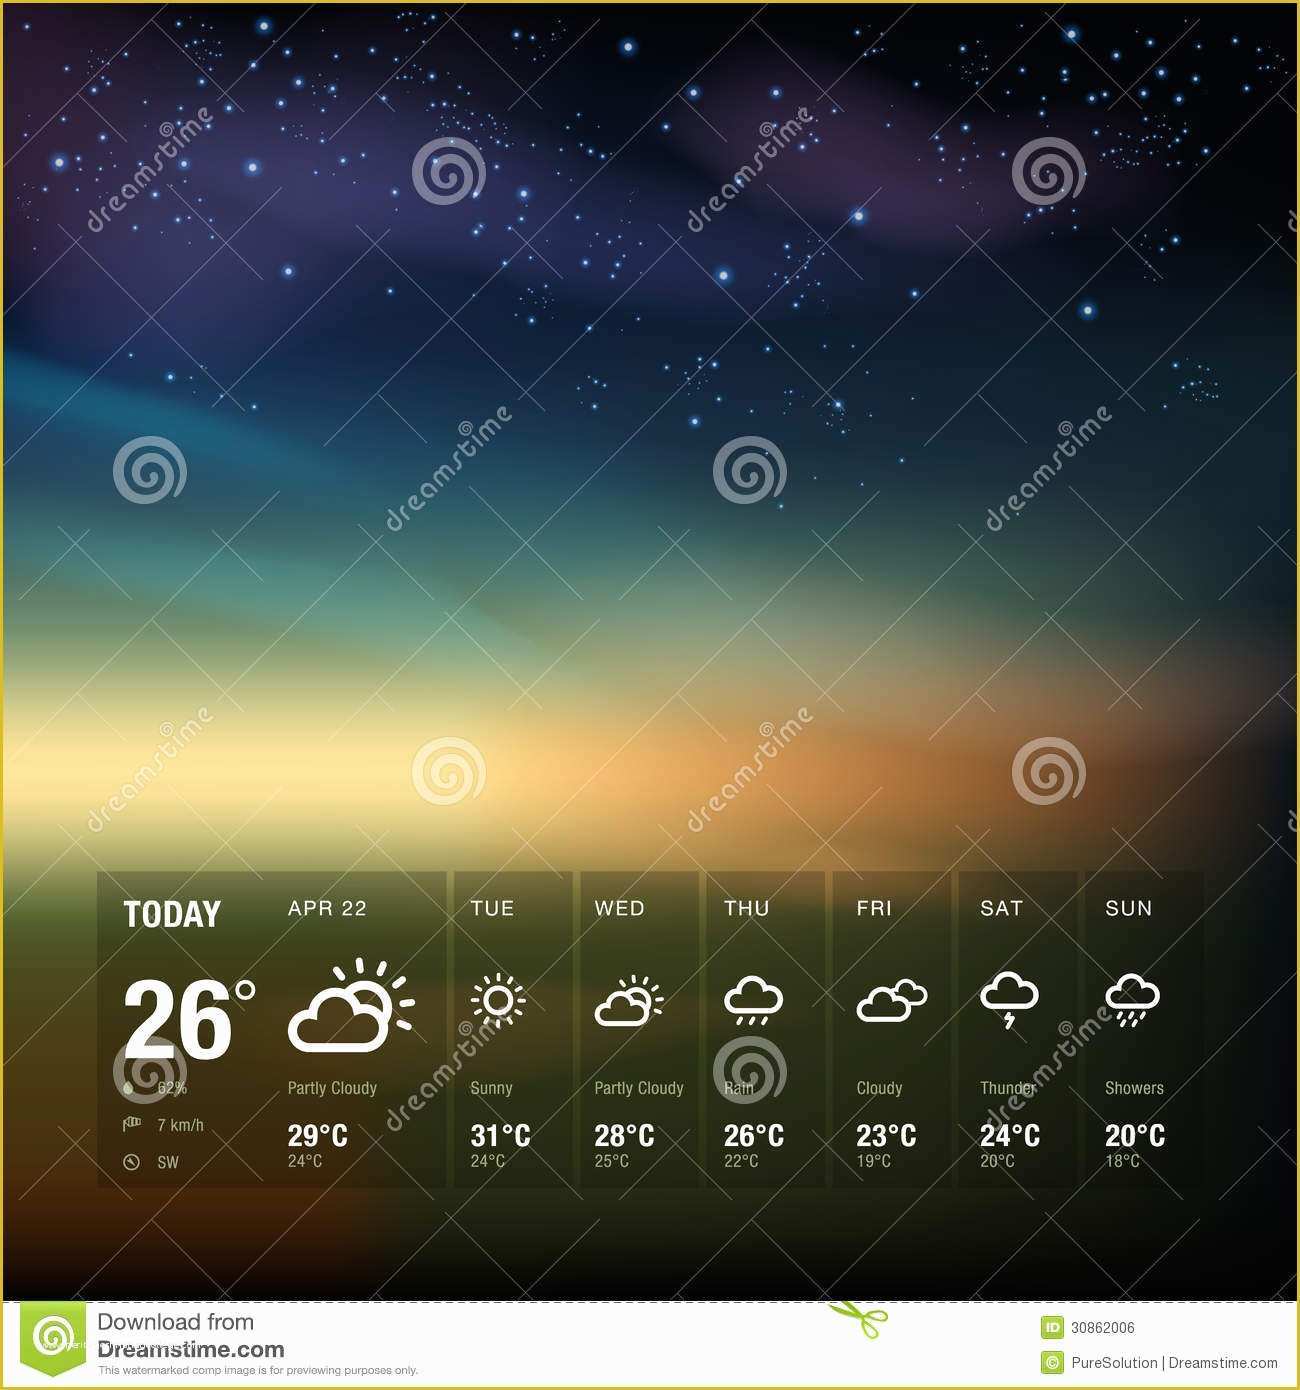 Free Weather Website Templates Of Weather Wid Template and Sky Background Stock Vector